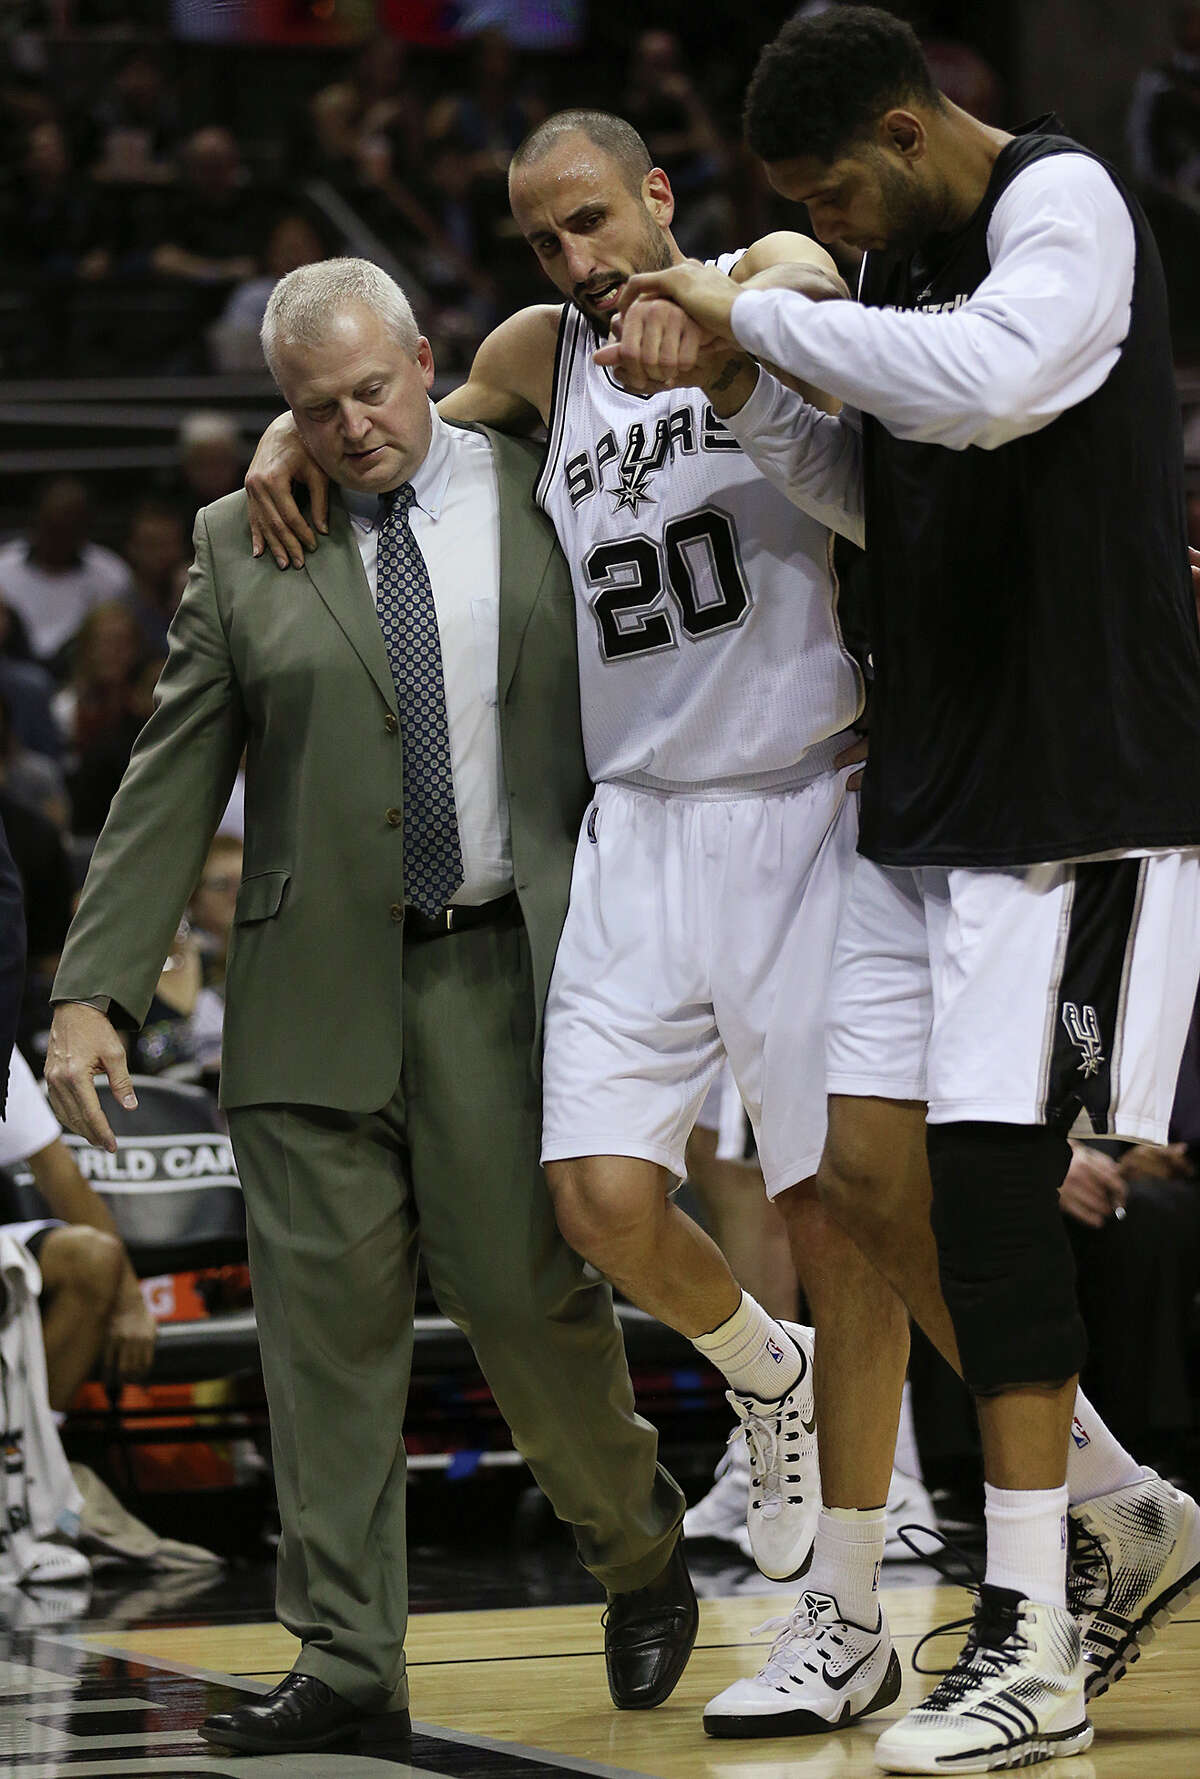 The Spurs’ Manu Ginobili is helped off the court by head athletic trainer Will Sevening and Tim Duncan during the second half at the AT&T Center on March 15, 2015.